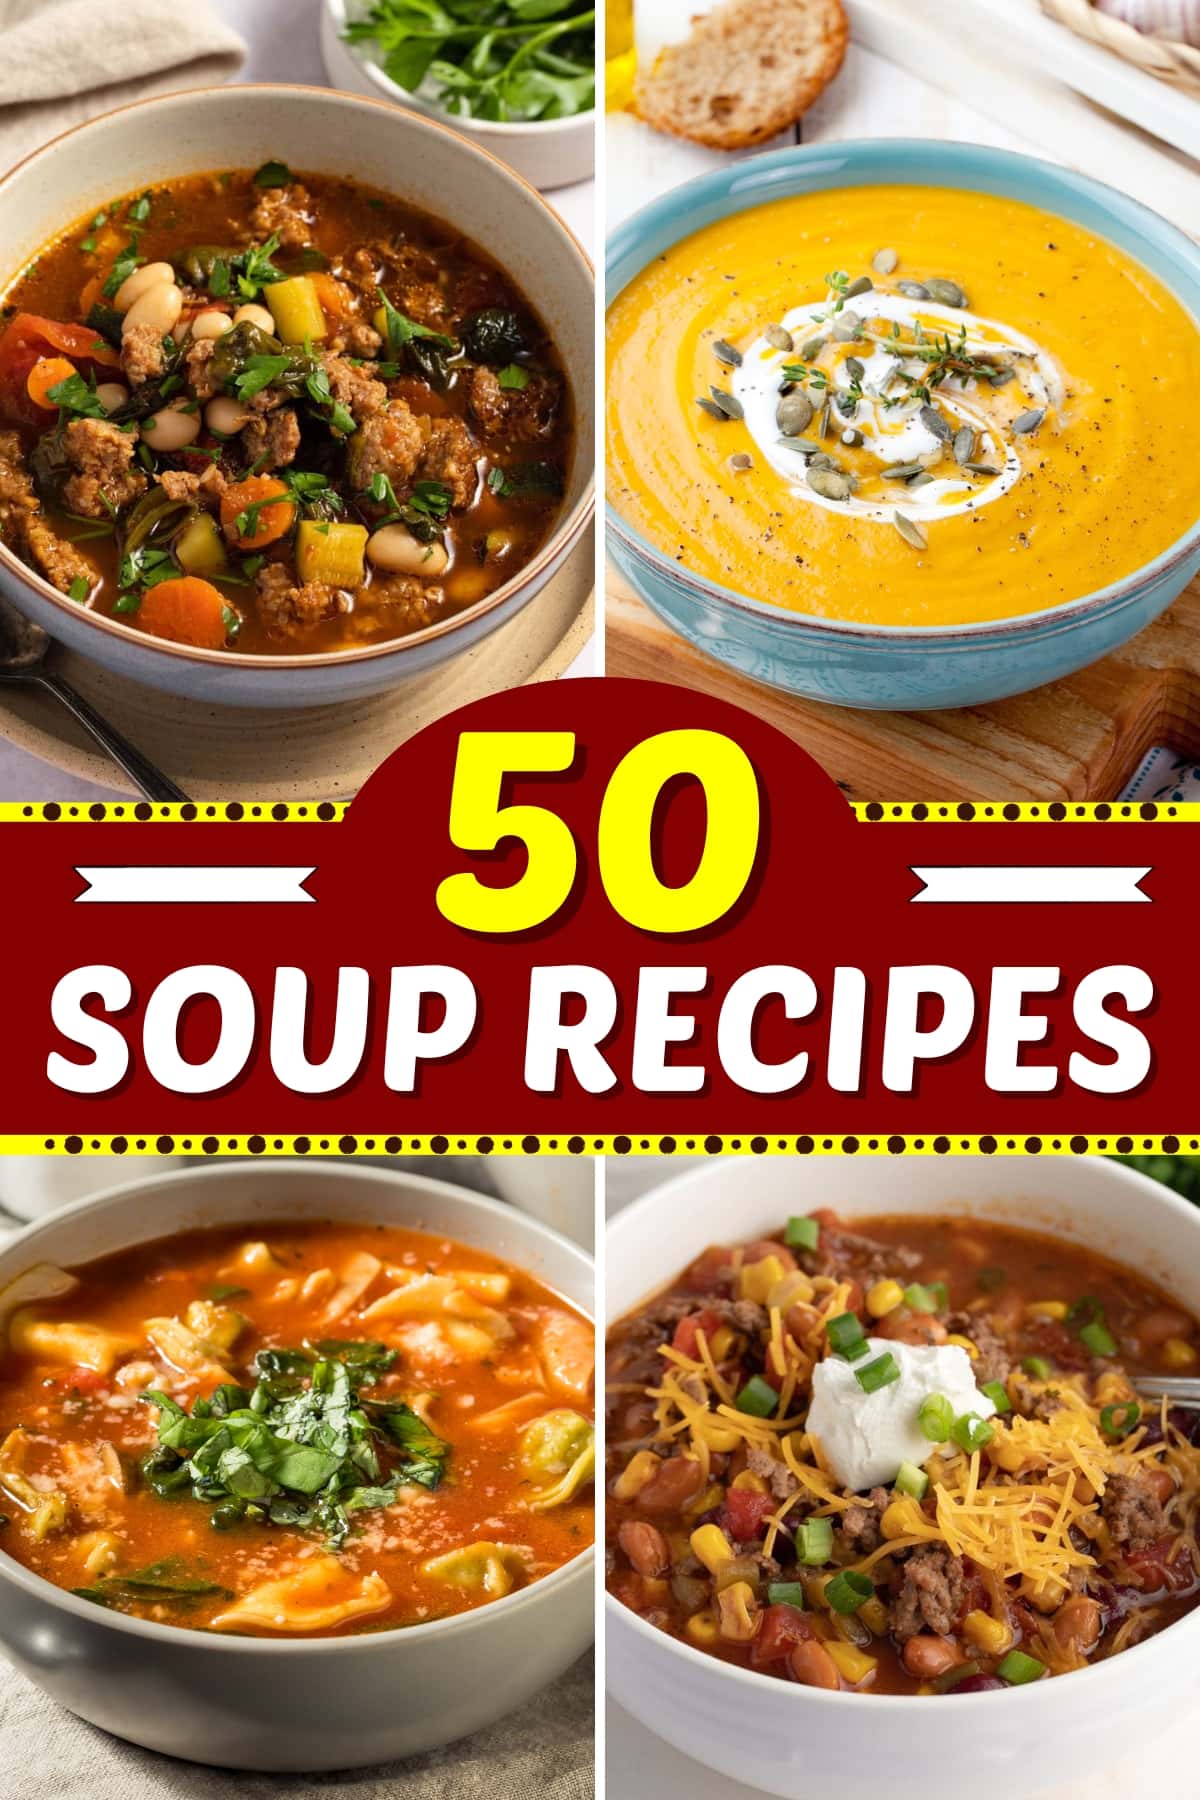 50 Soup Recipes We Can't Live Without - Insanely Good